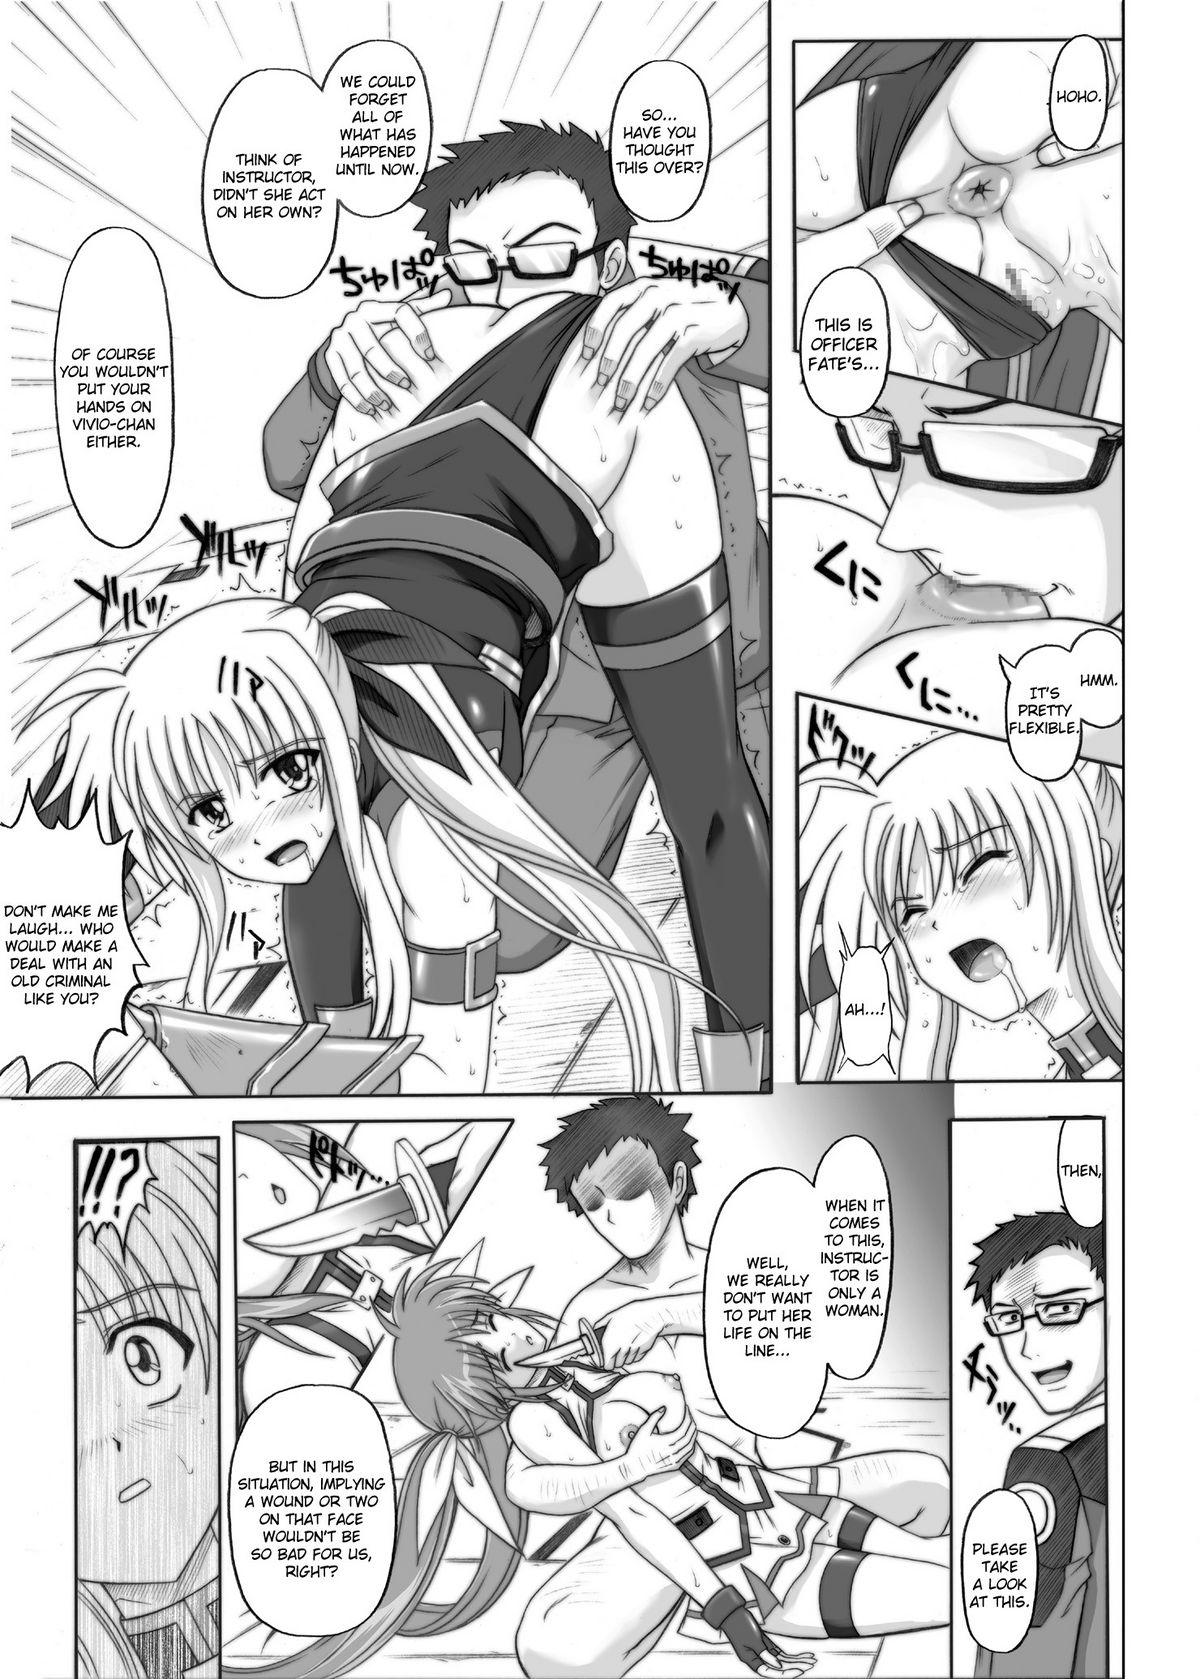 8teen 840 BAD END - Color Classic Situation Note Extention 1.5 - Mahou shoujo lyrical nanoha Nigeria - Page 6